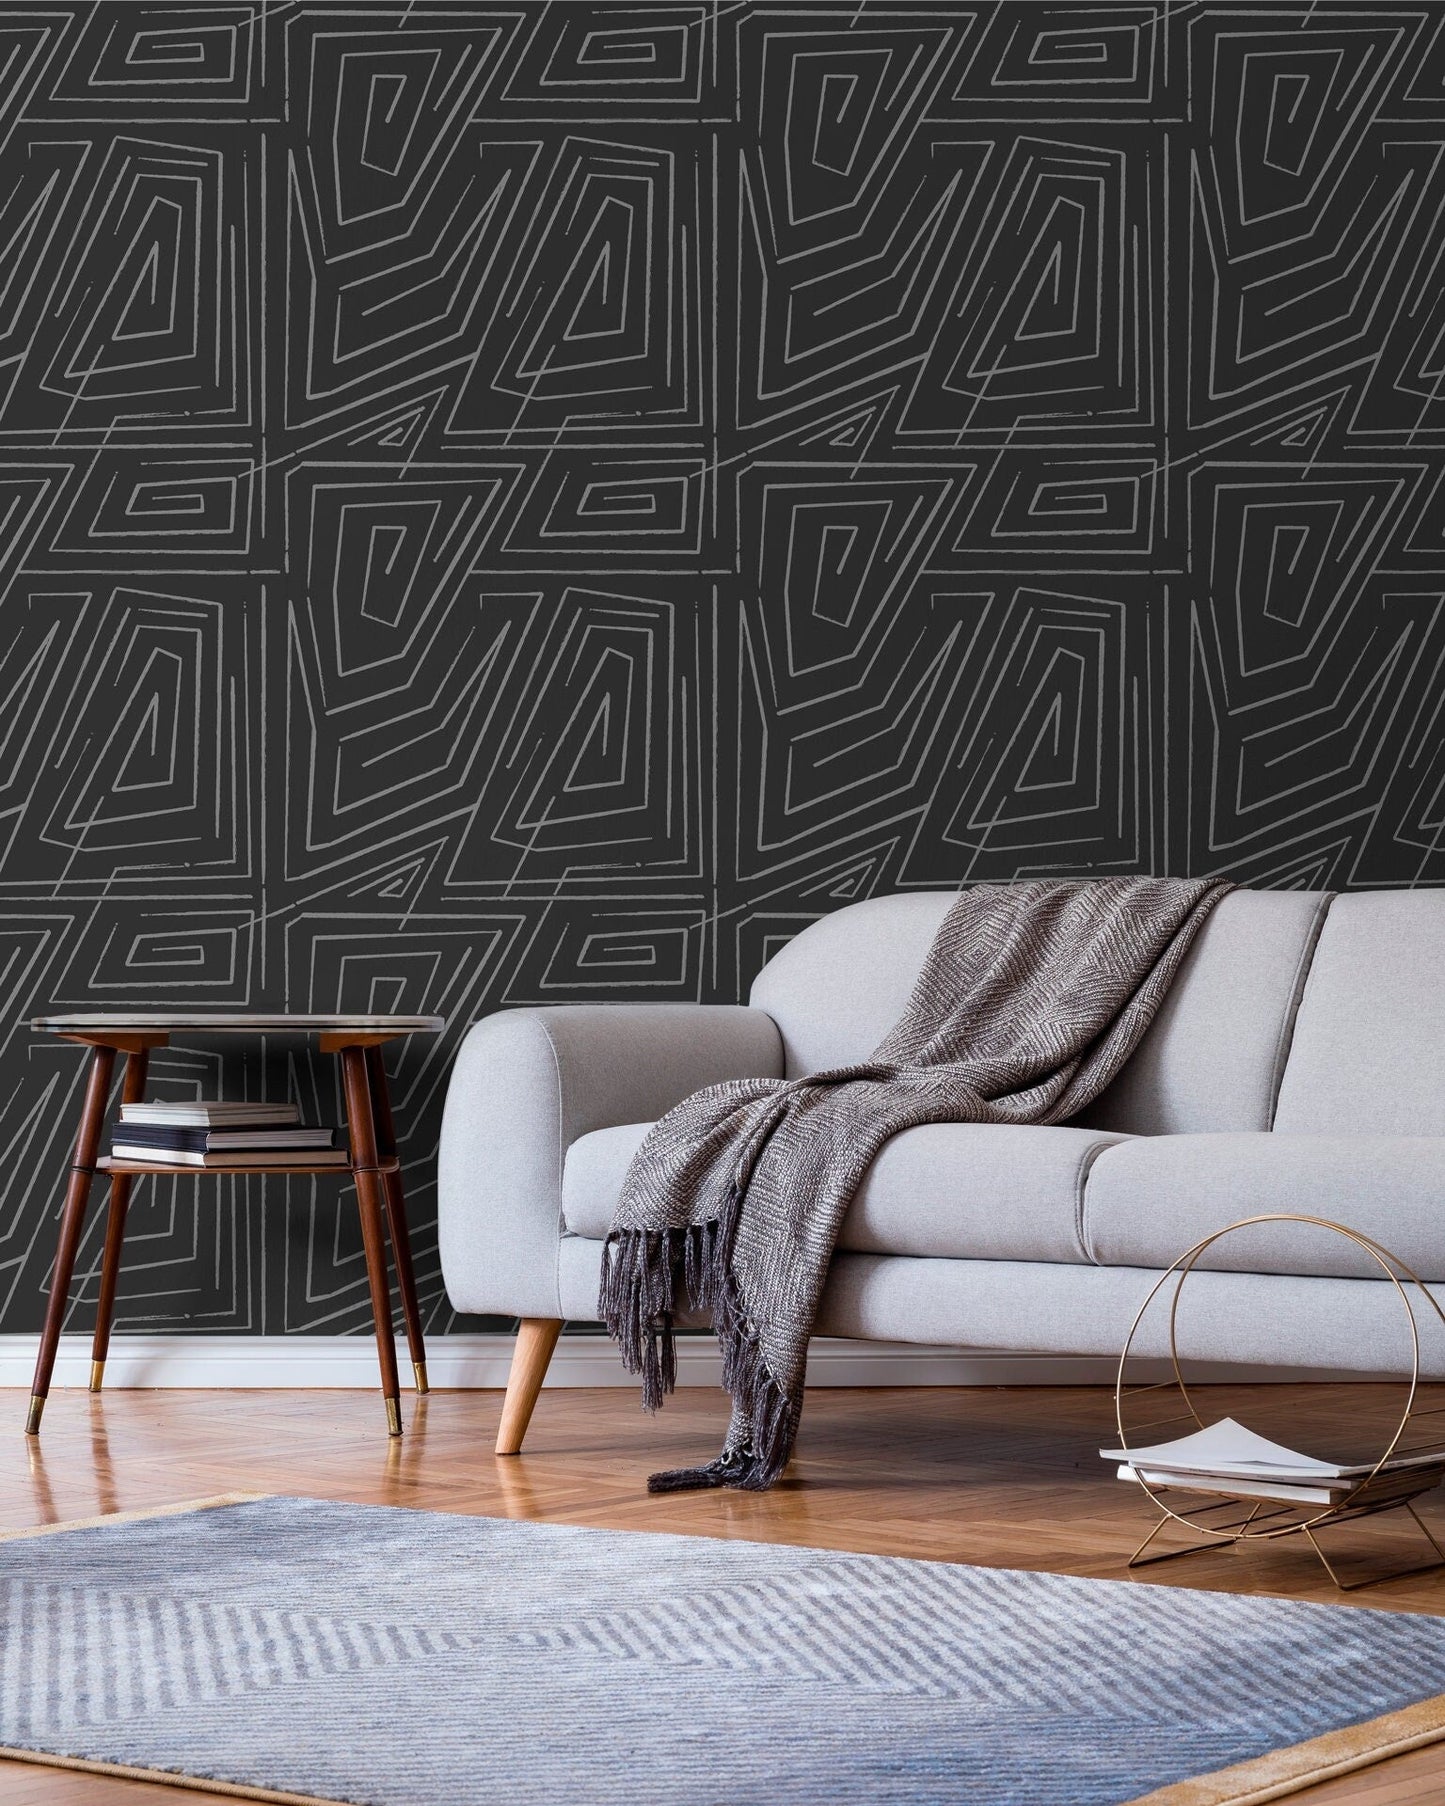 Wallpaper Peel and Stick Wallpaper Removable Wallpaper Home Decor Wall Art Wall Decor Room Decor / Gray and White Abstract Wallpaper - C529